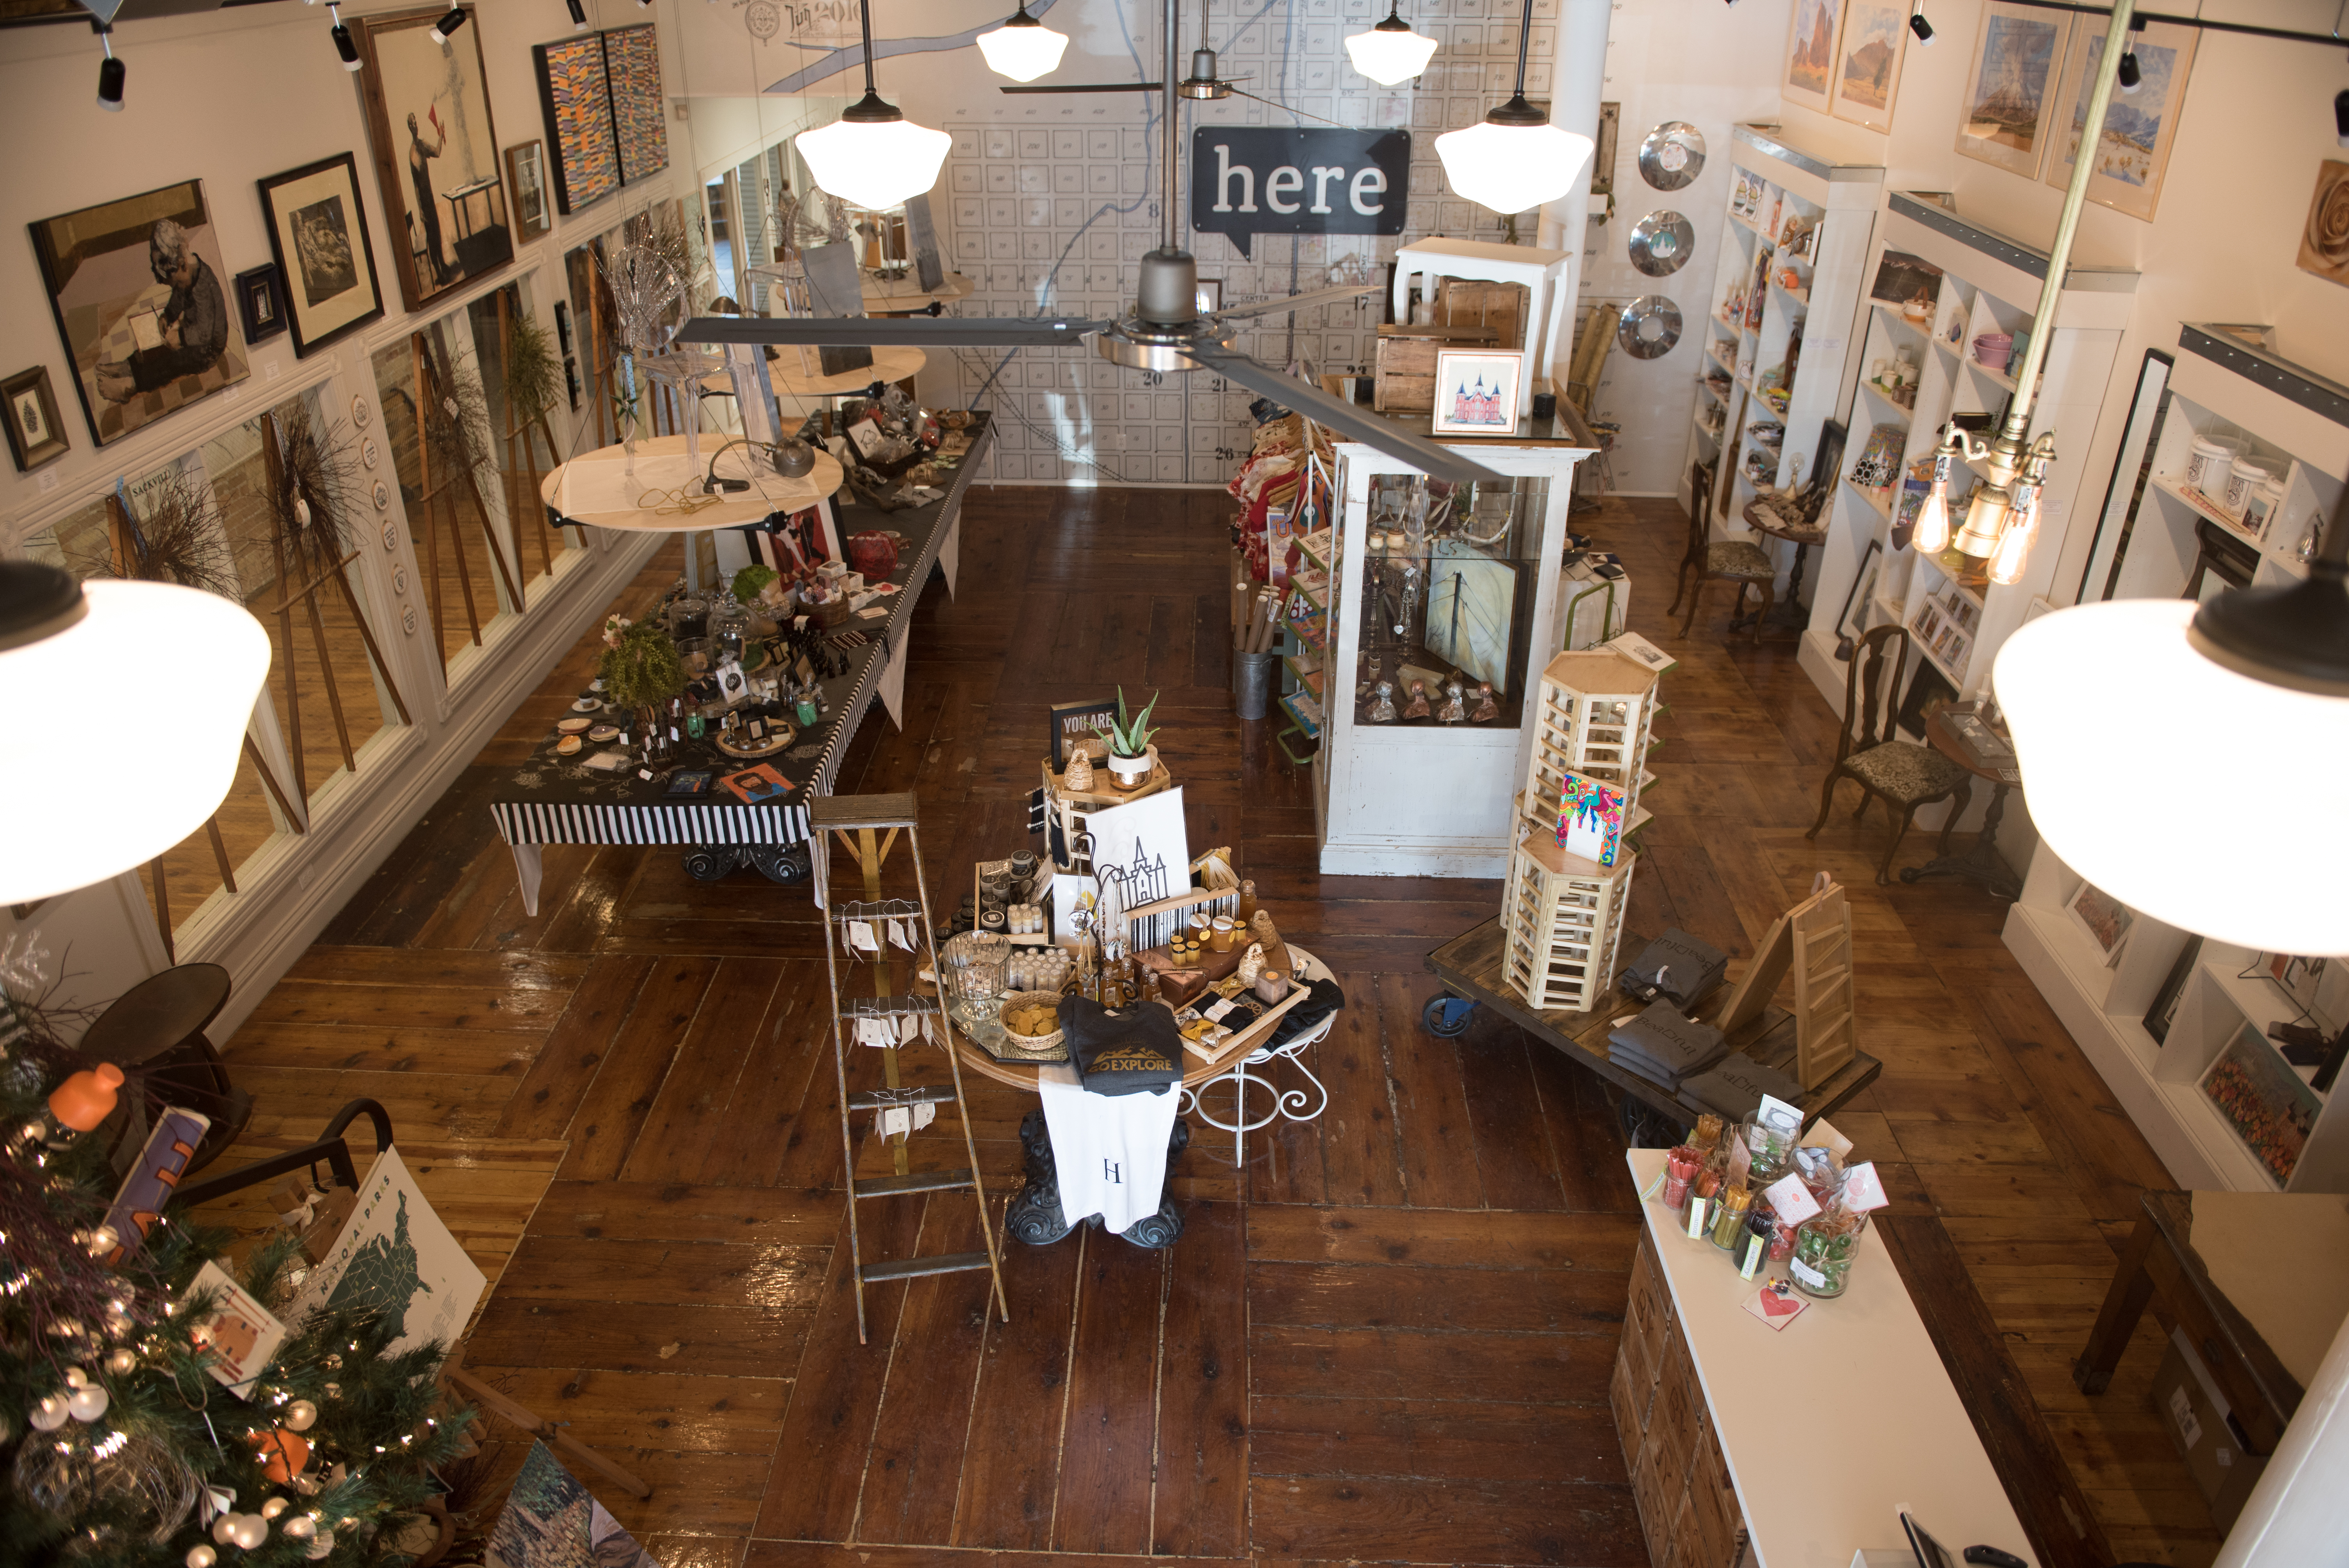 Here displays a wide variety of local artists' products.